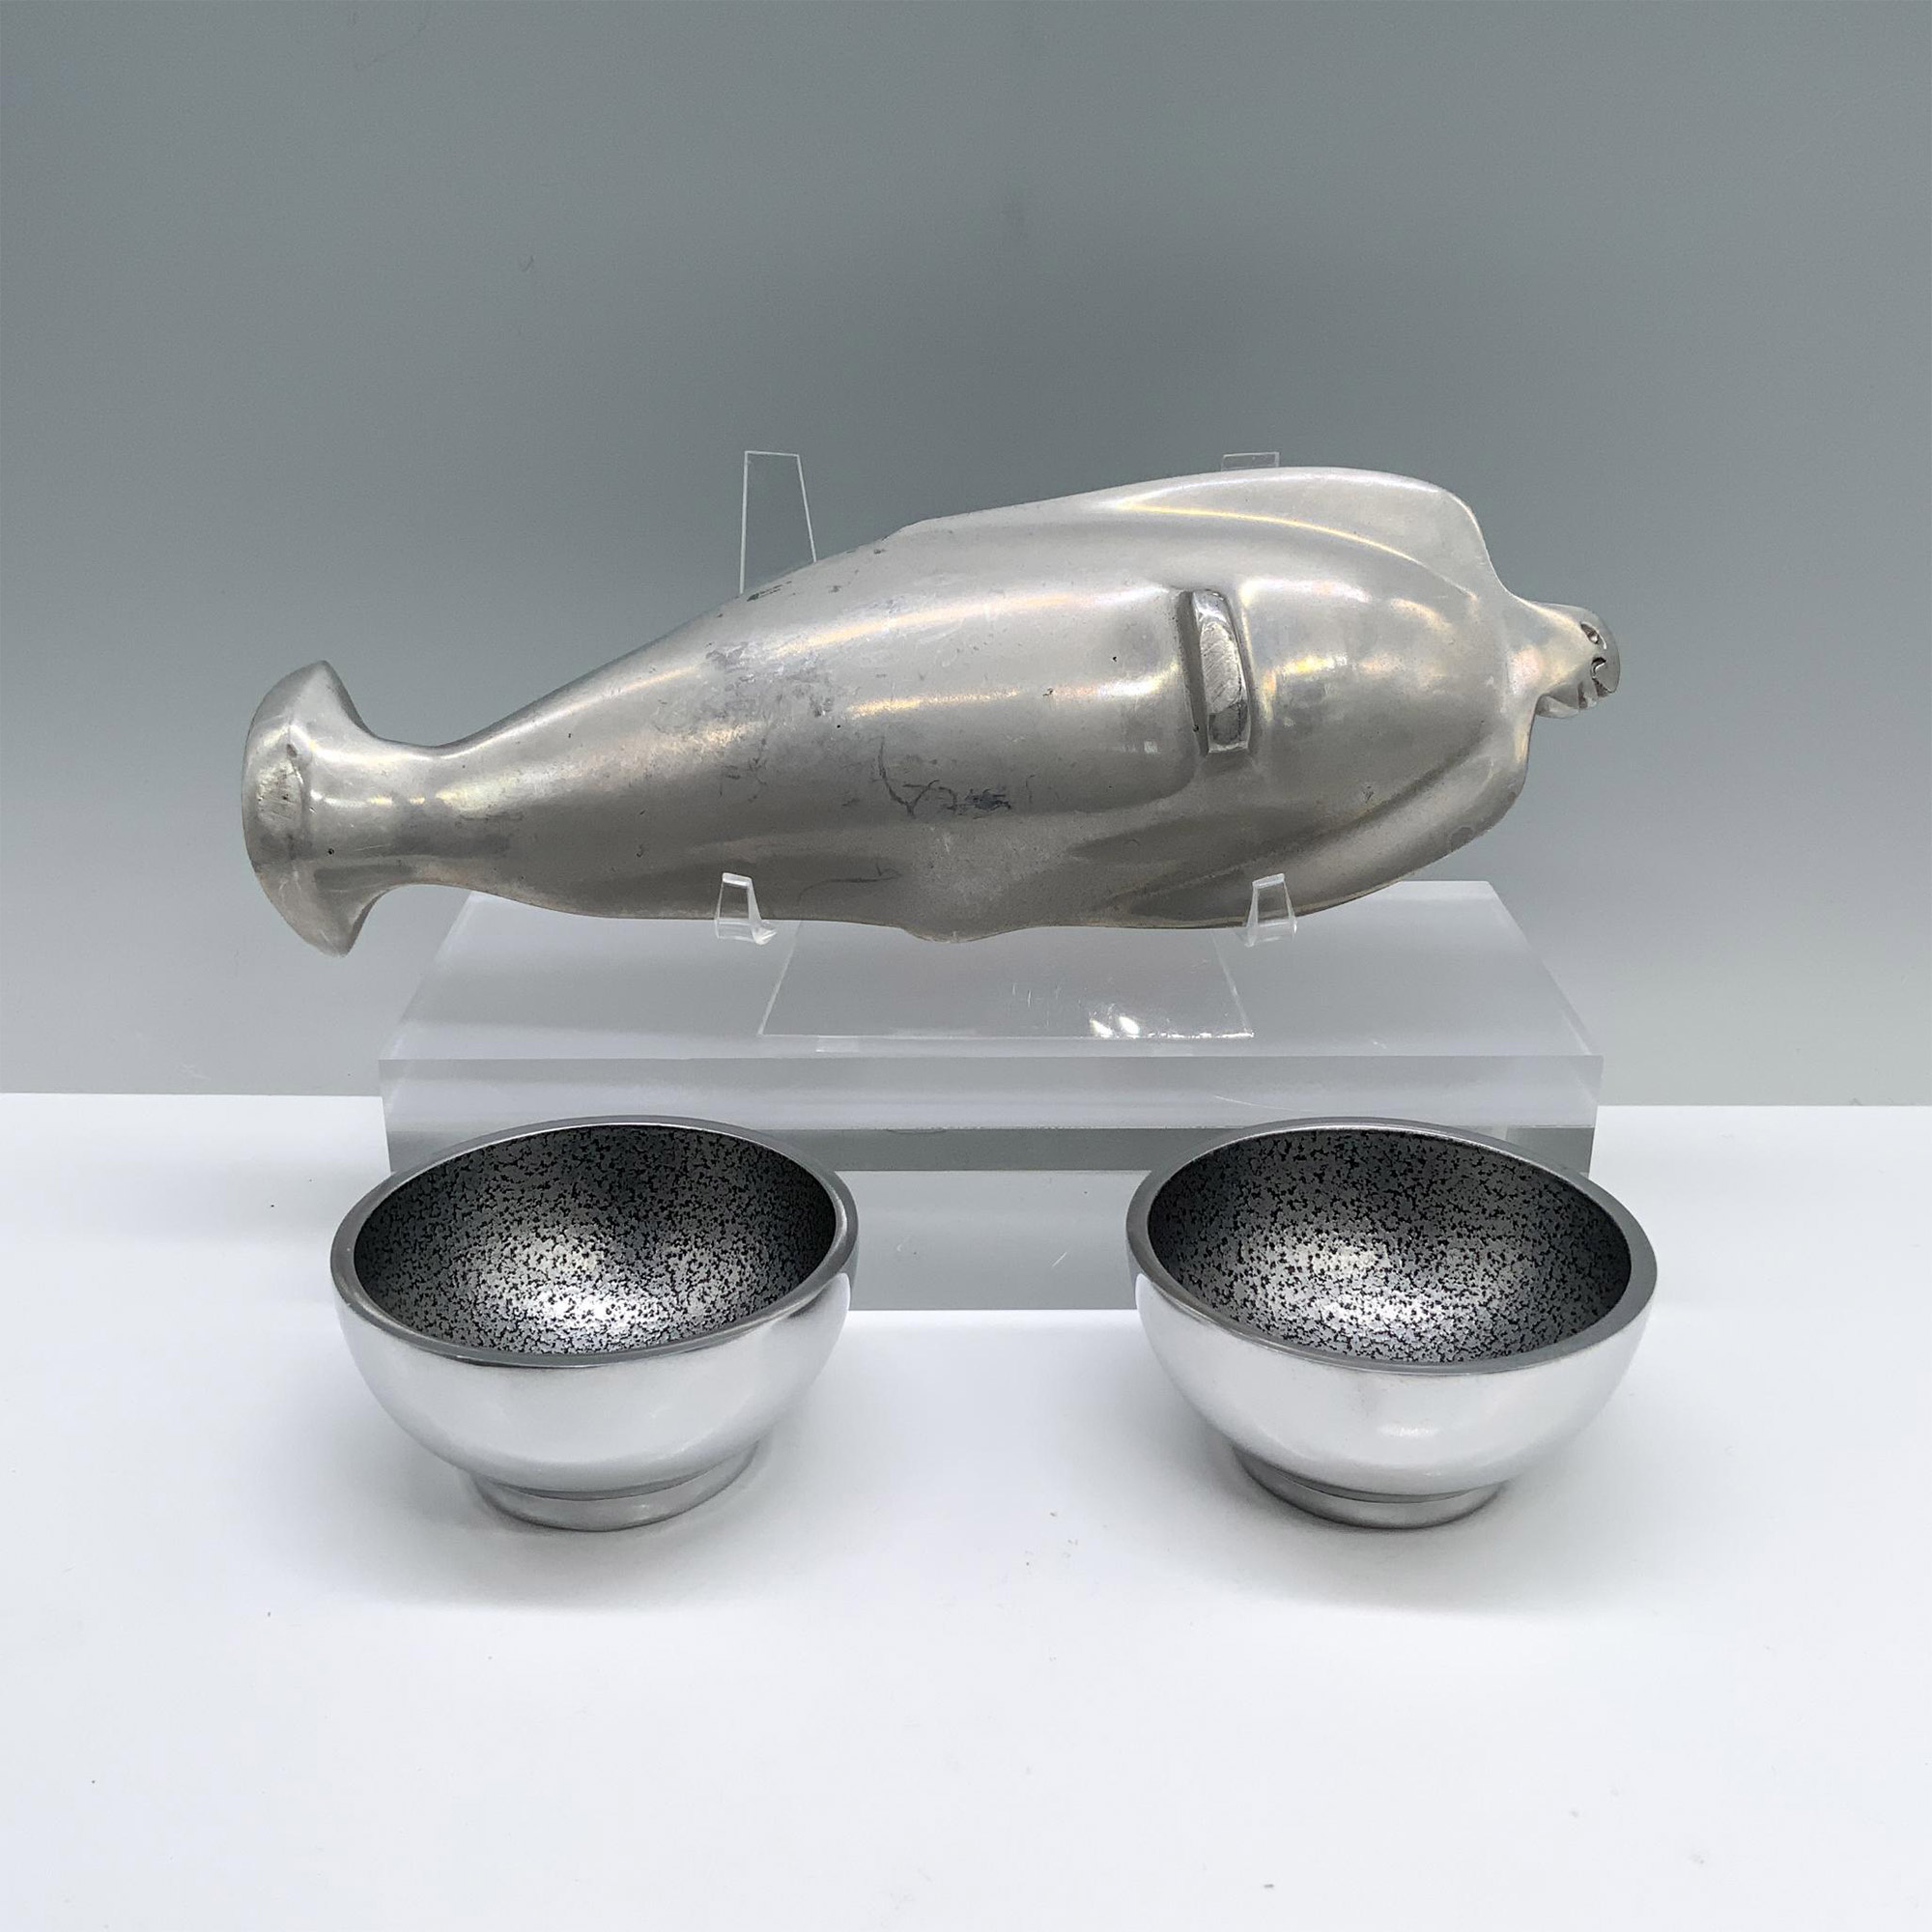 3pc Carrol Boyes Style Man Spoon Rest and Bowls - Image 3 of 3